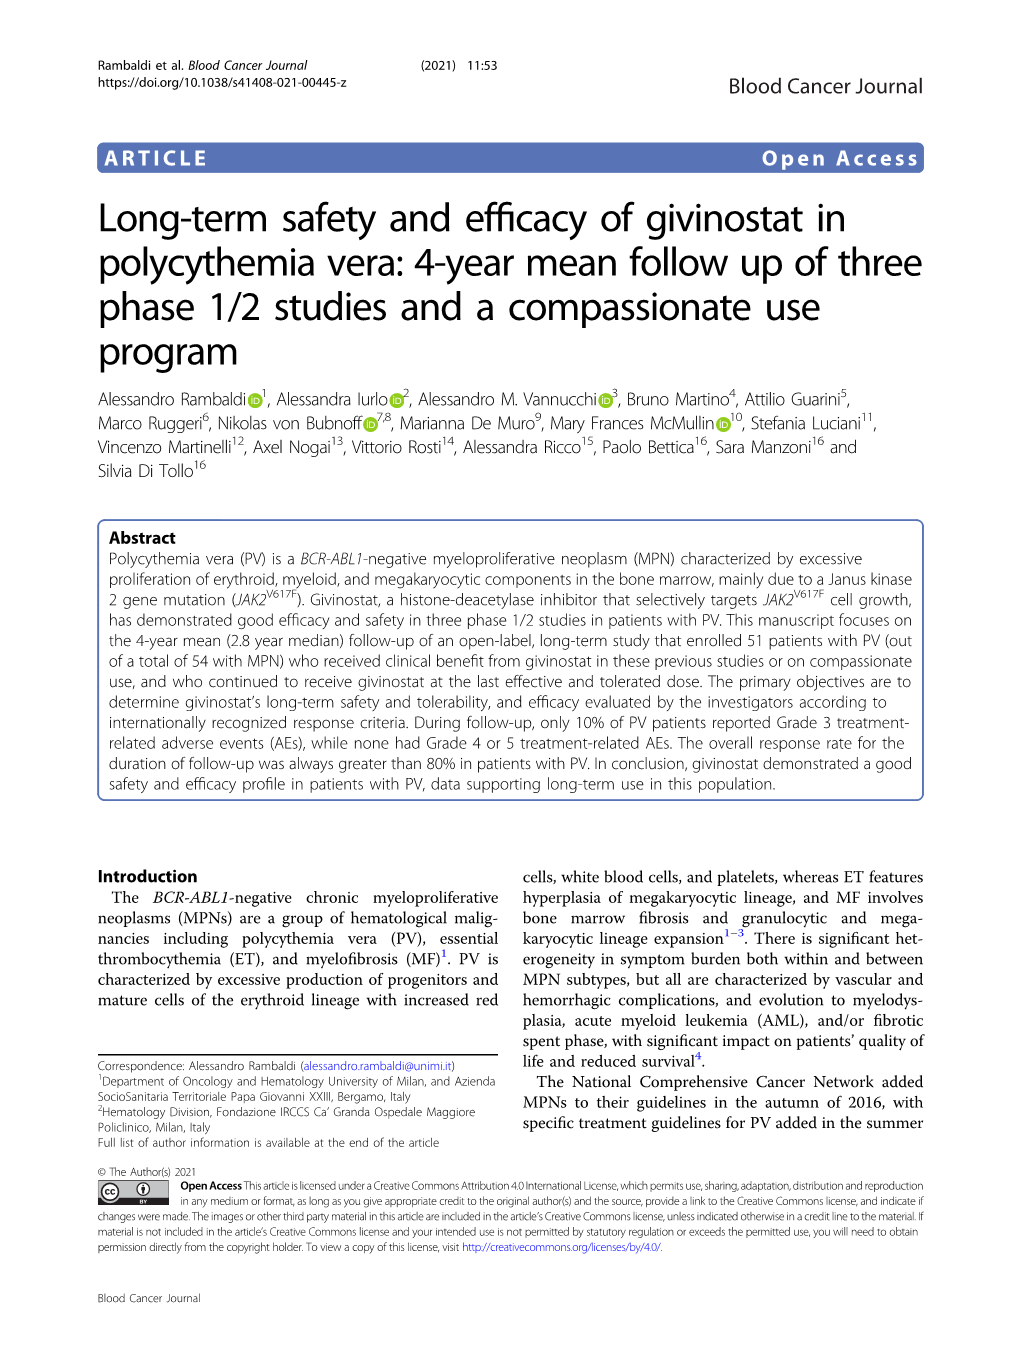 Long-Term Safety and Efficacy of Givinostat in Polycythemia Vera: 4